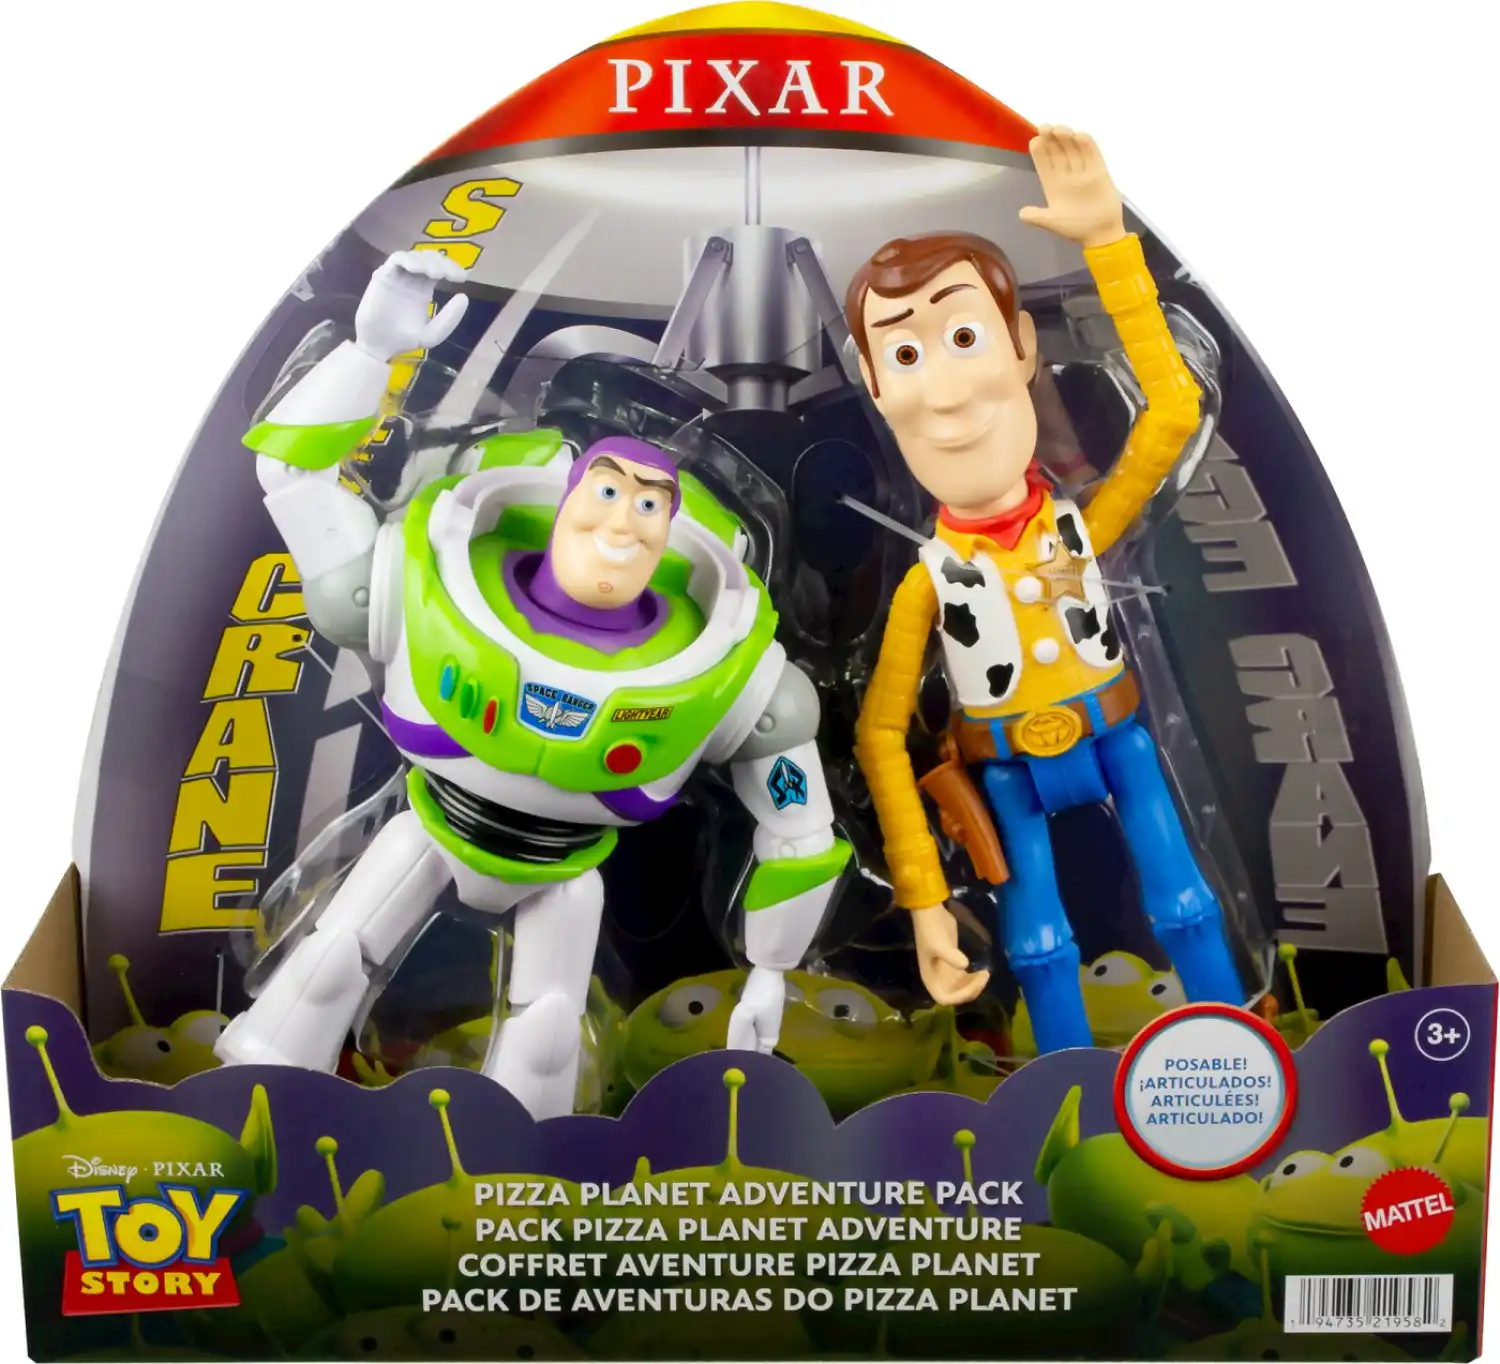 Disney Pixar - Toy Story 7-inch Woody And Buzz Action Figure Toys 2-pack Pizza Planet Adventure